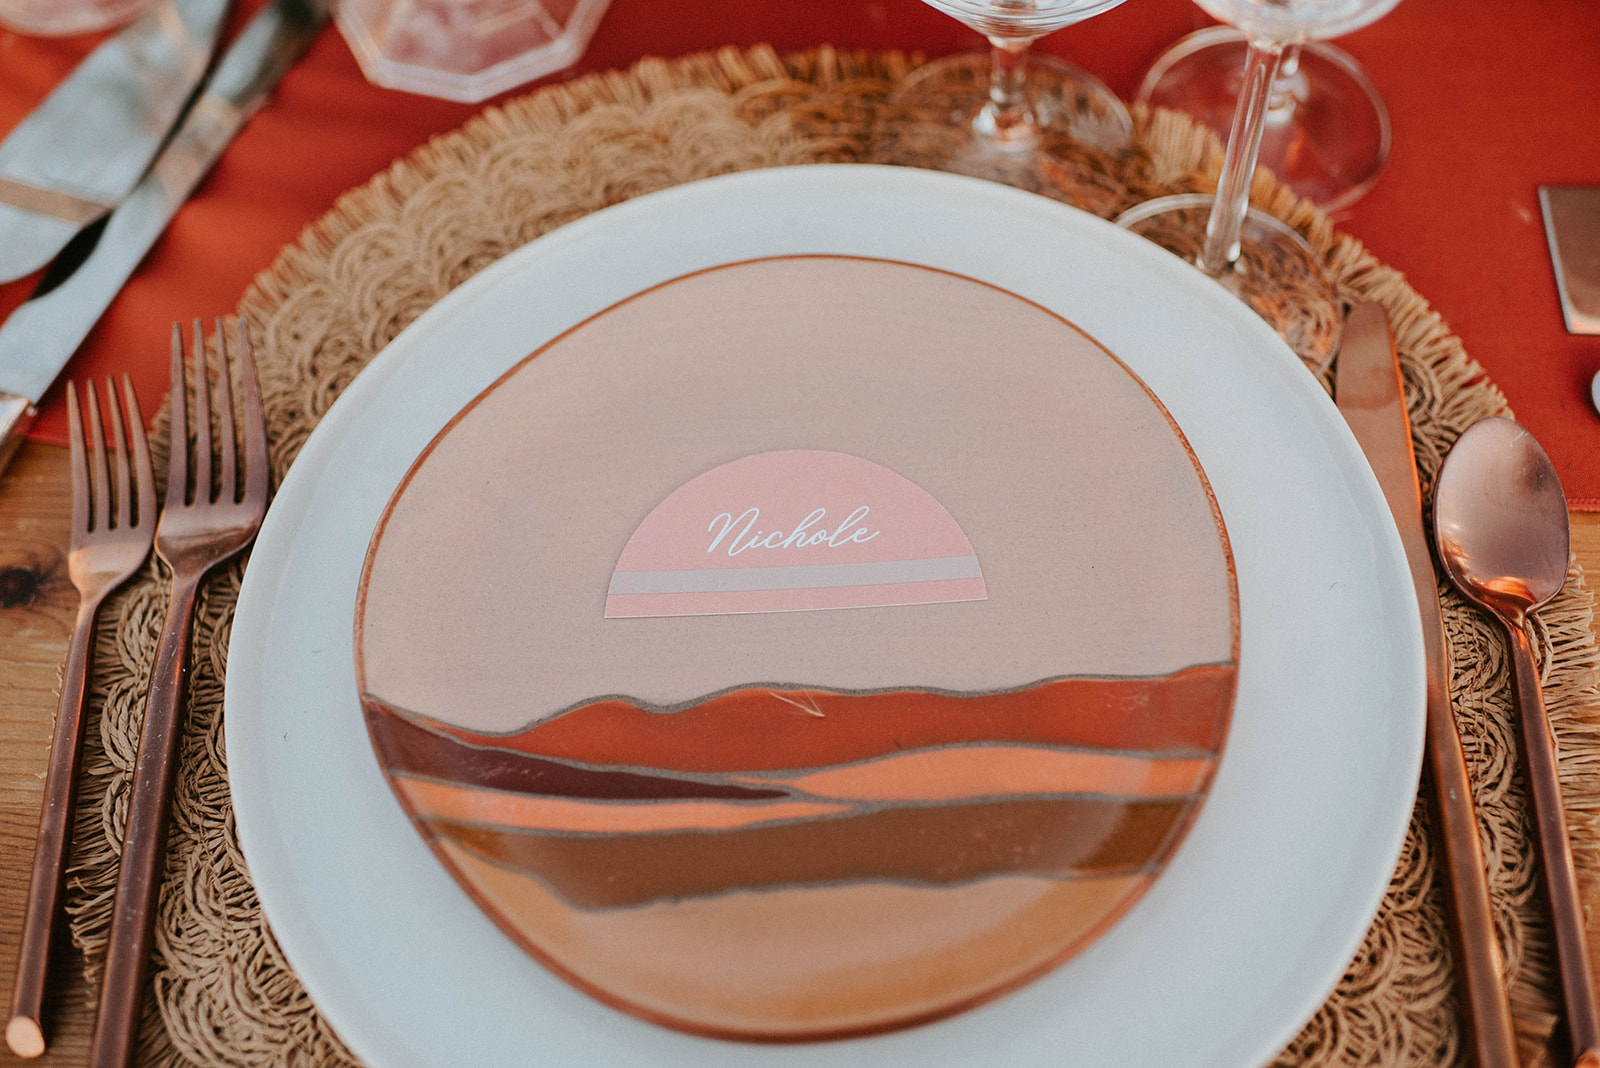 Boho styled plate decorated to look like mountains with name tag placed. Bronze utensils 